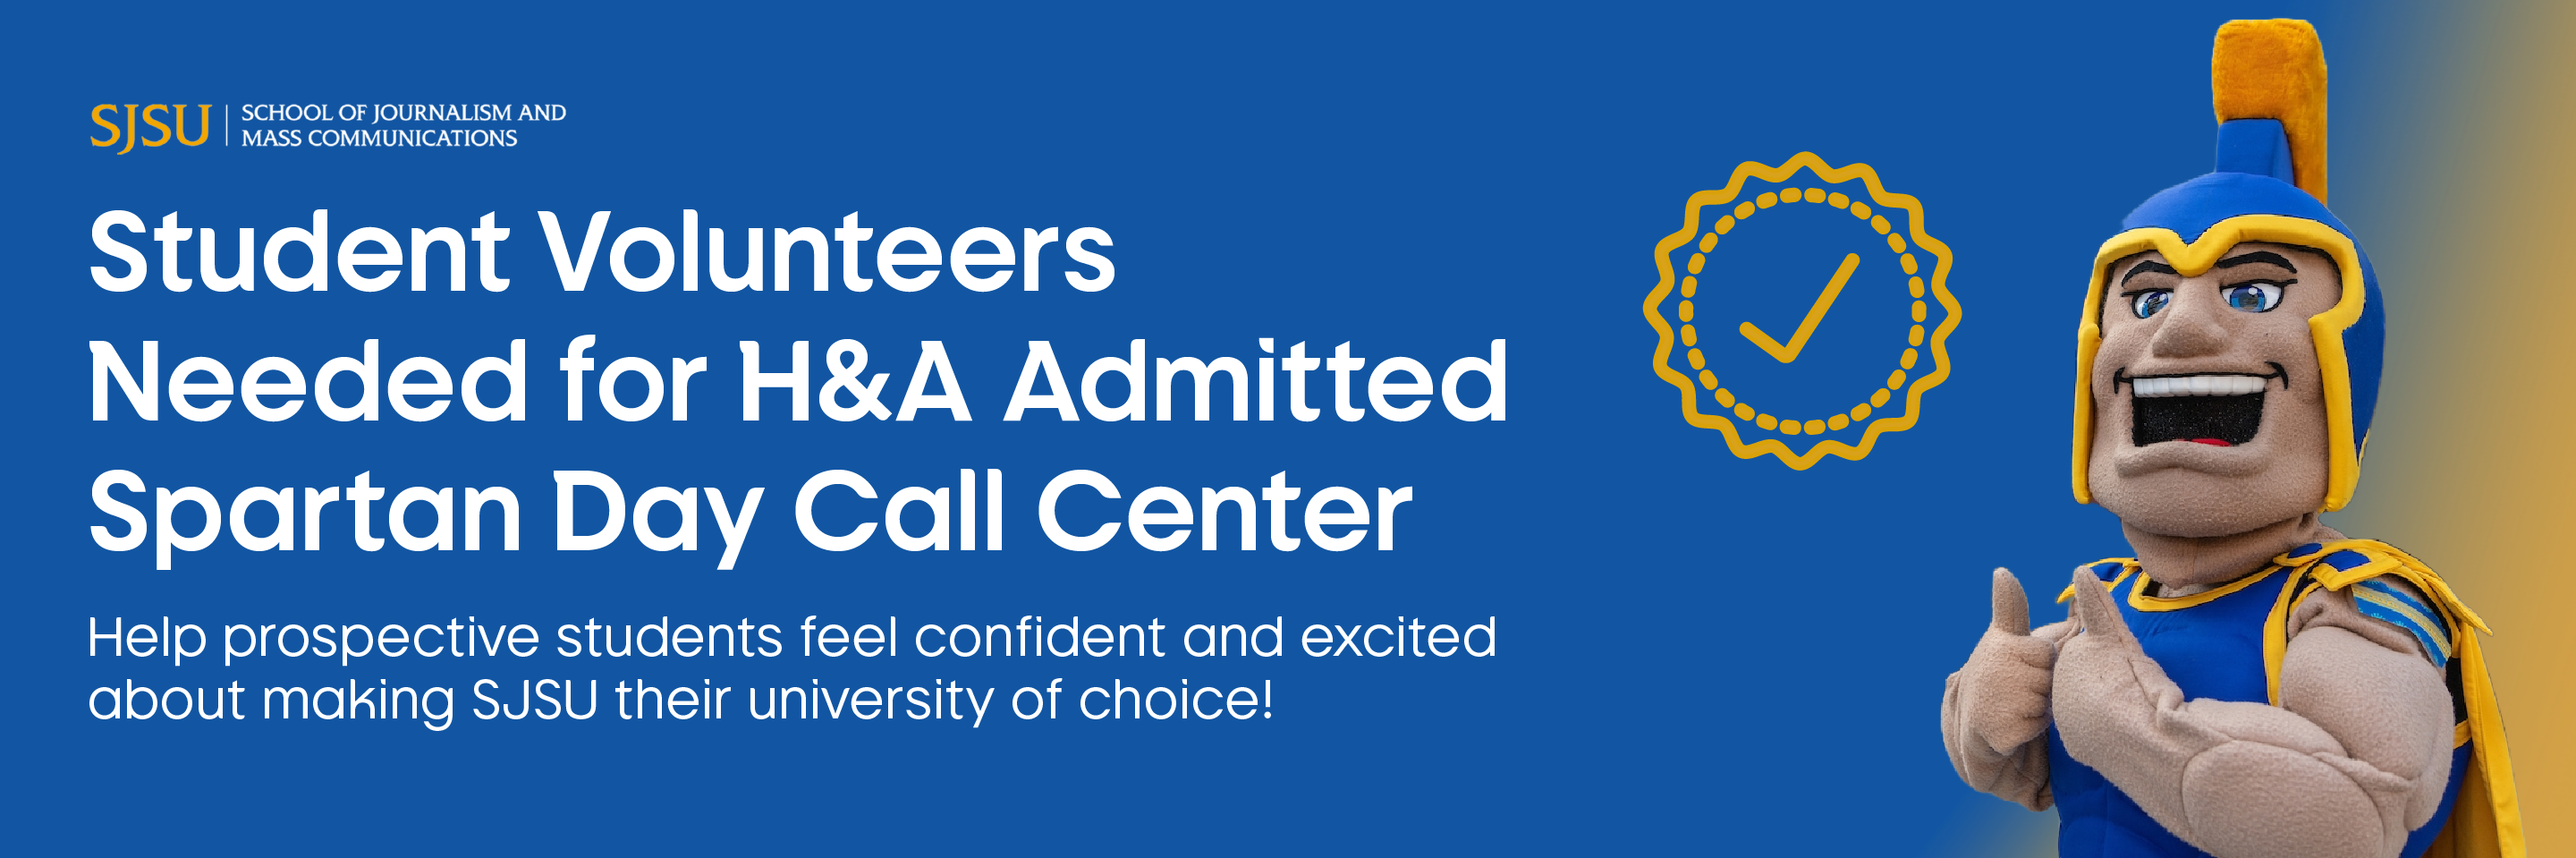 Student Volunteers Needed for H&A Admitted Spartan Day Call Center - Help prospective students feel confident and excited about making SJSU their university of choice!